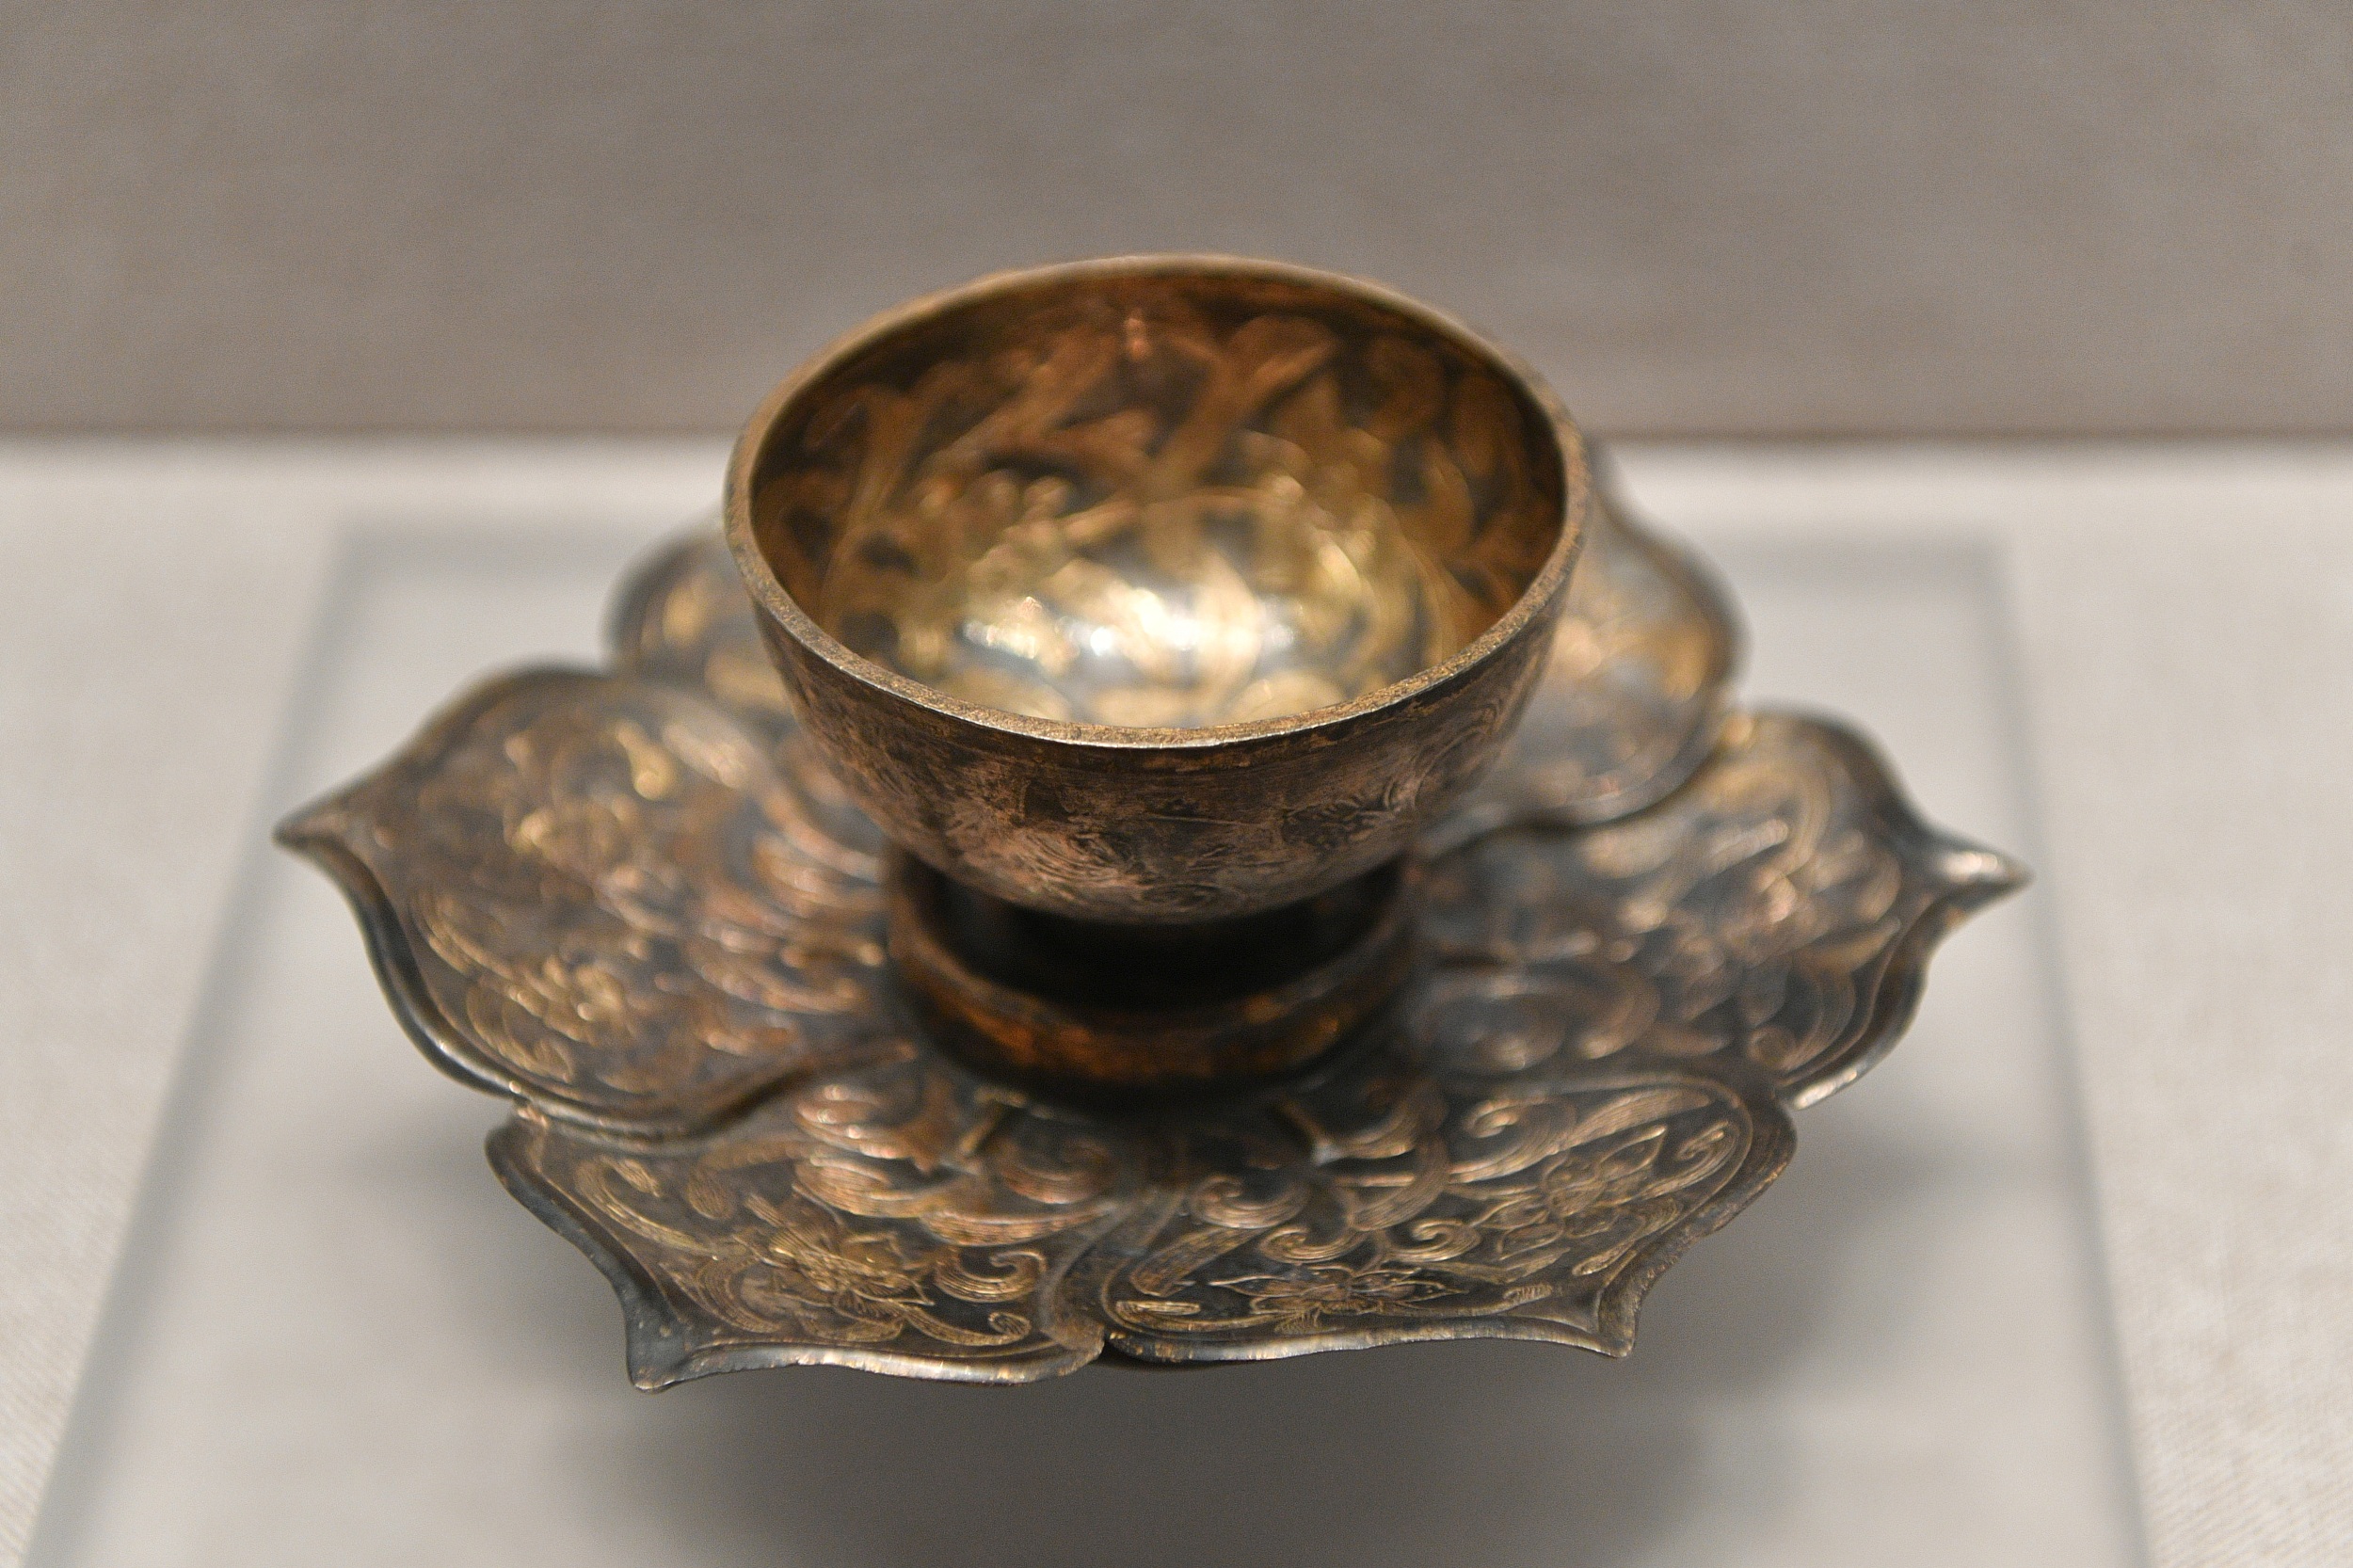 Burial items of Southern Song Dynasty exhibited in Jiangsu